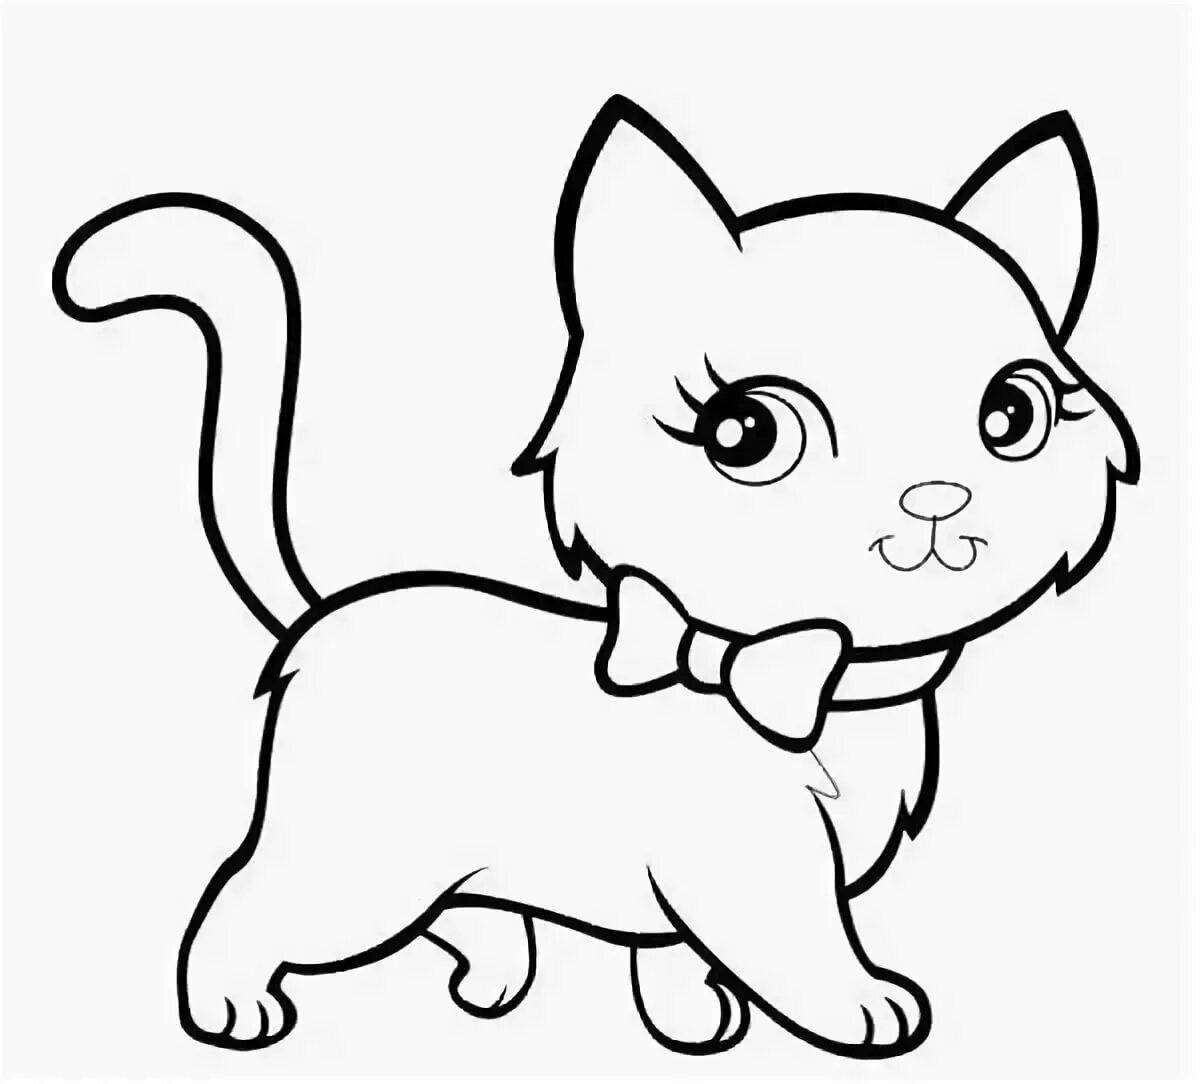 Joyful cute cats and dogs coloring book